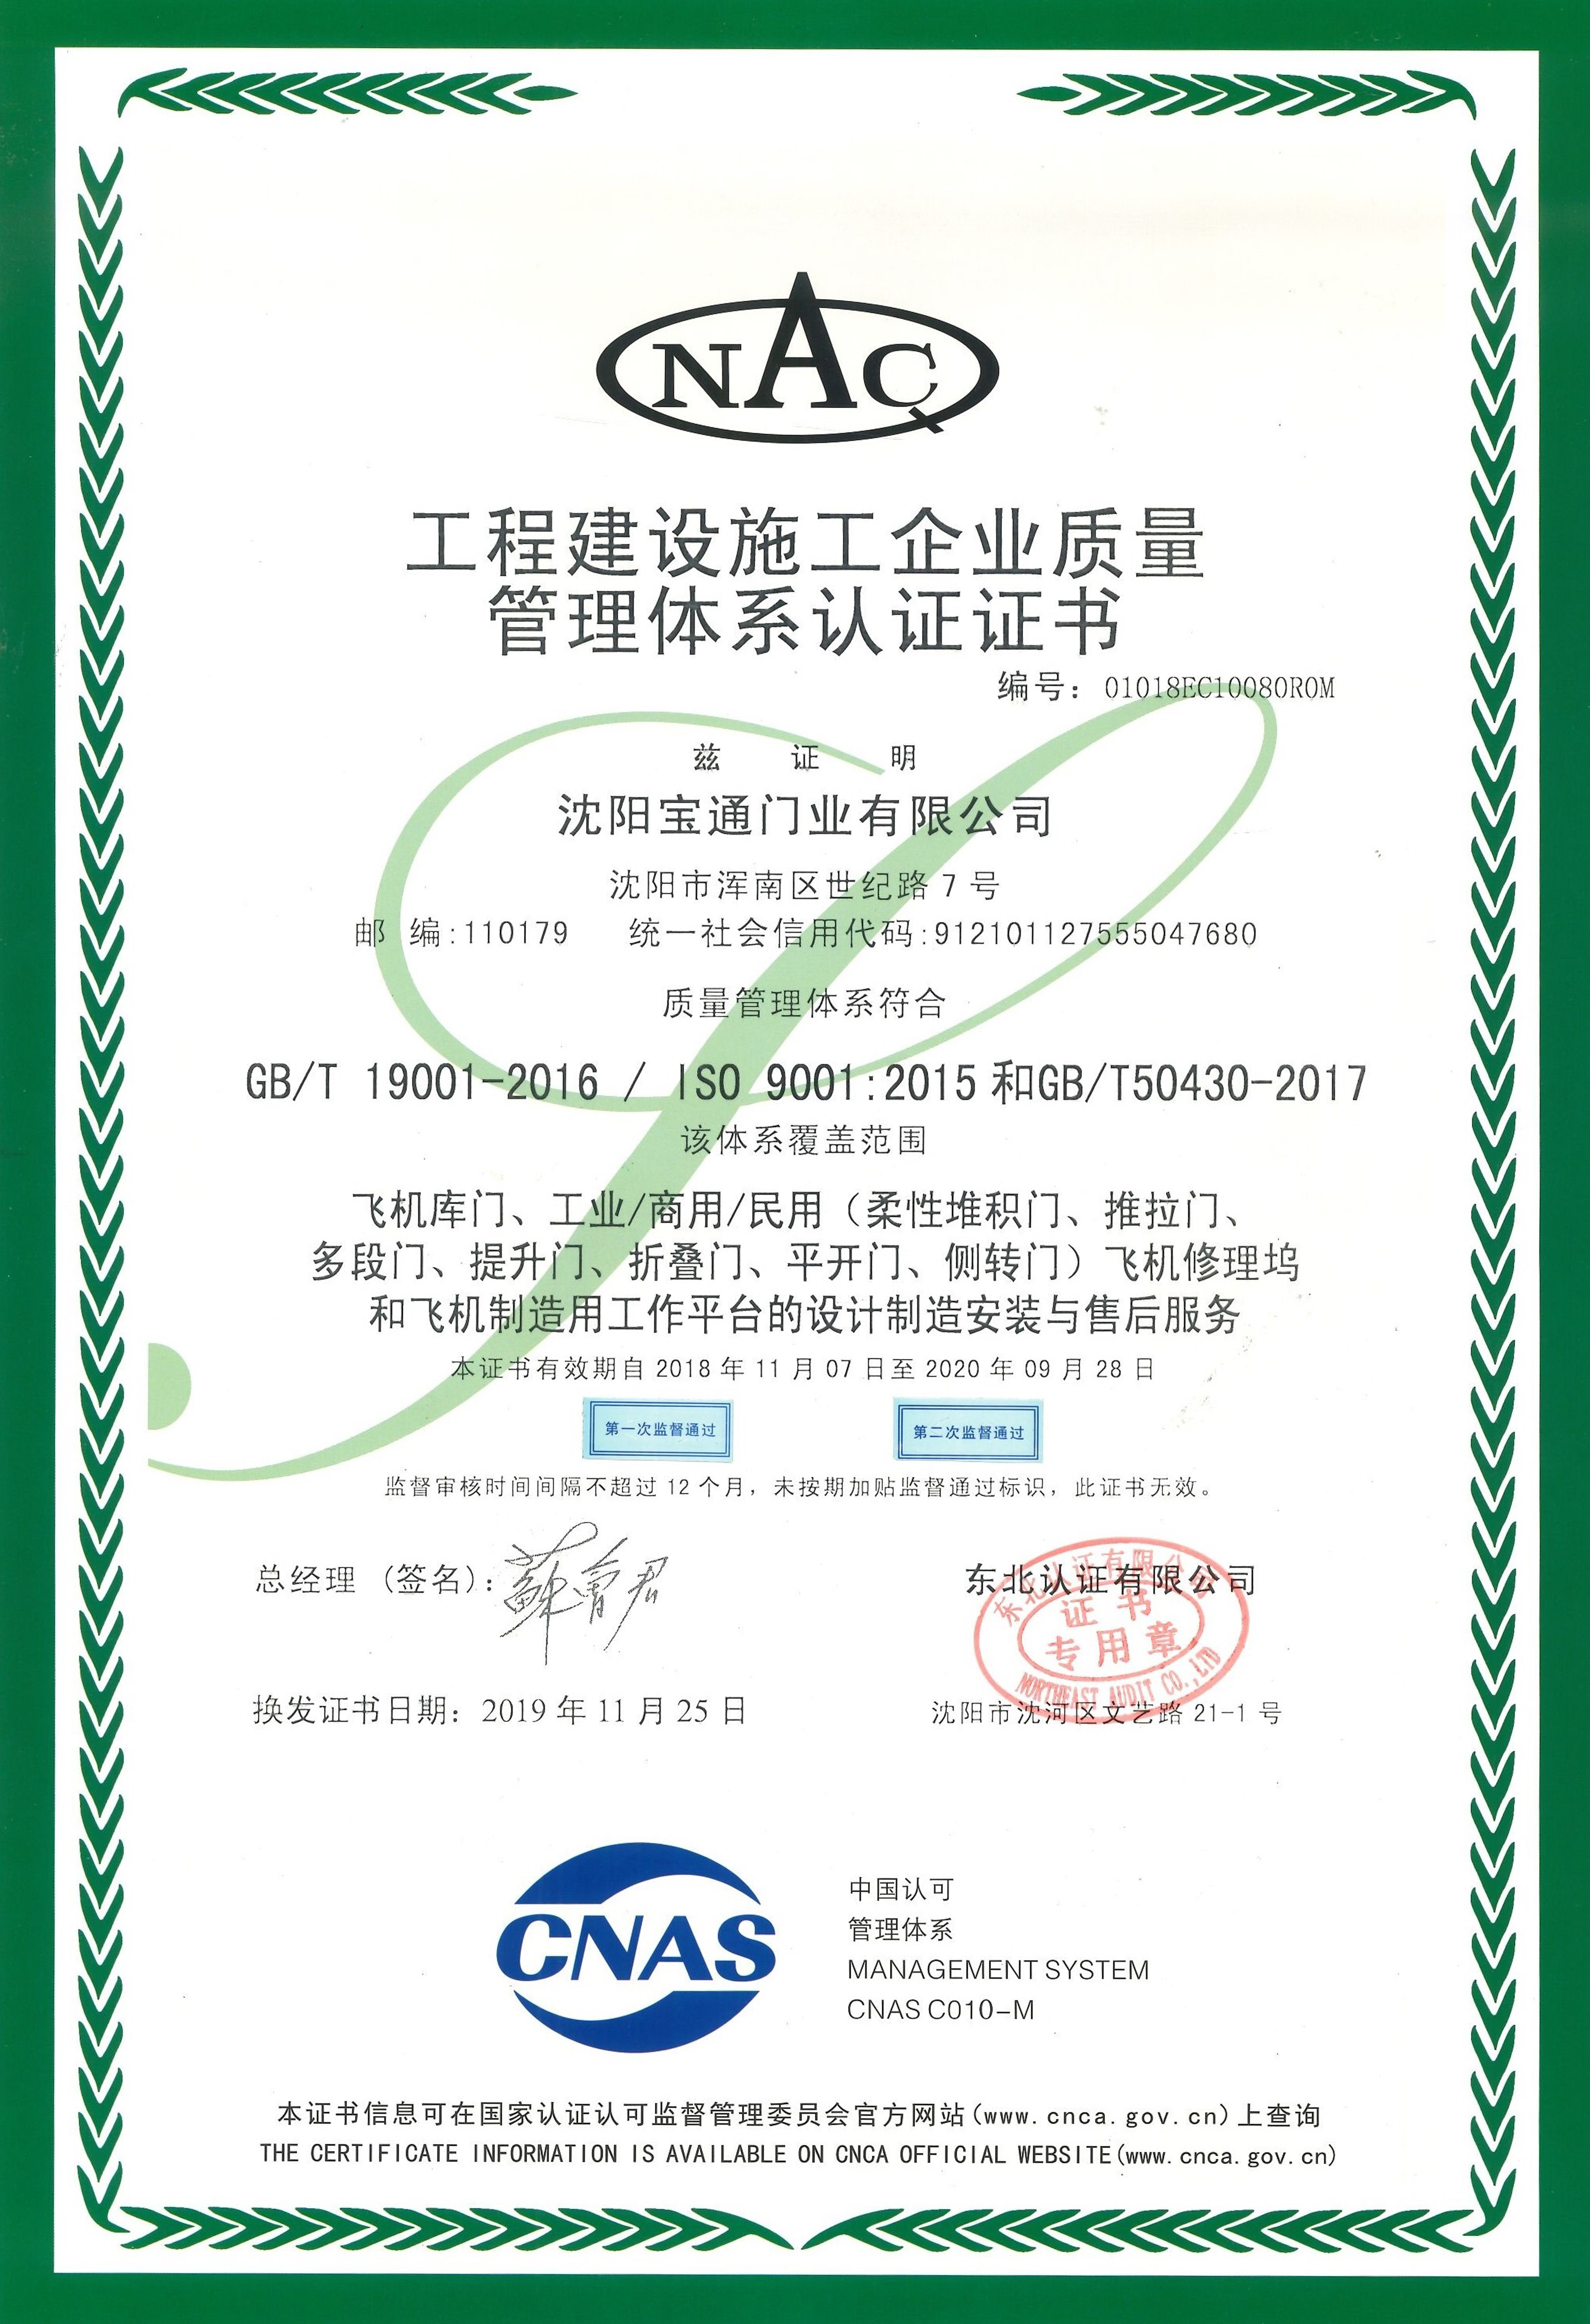 Certificate of Quality Management System for Engineering Construction Enterprise (Chinese)